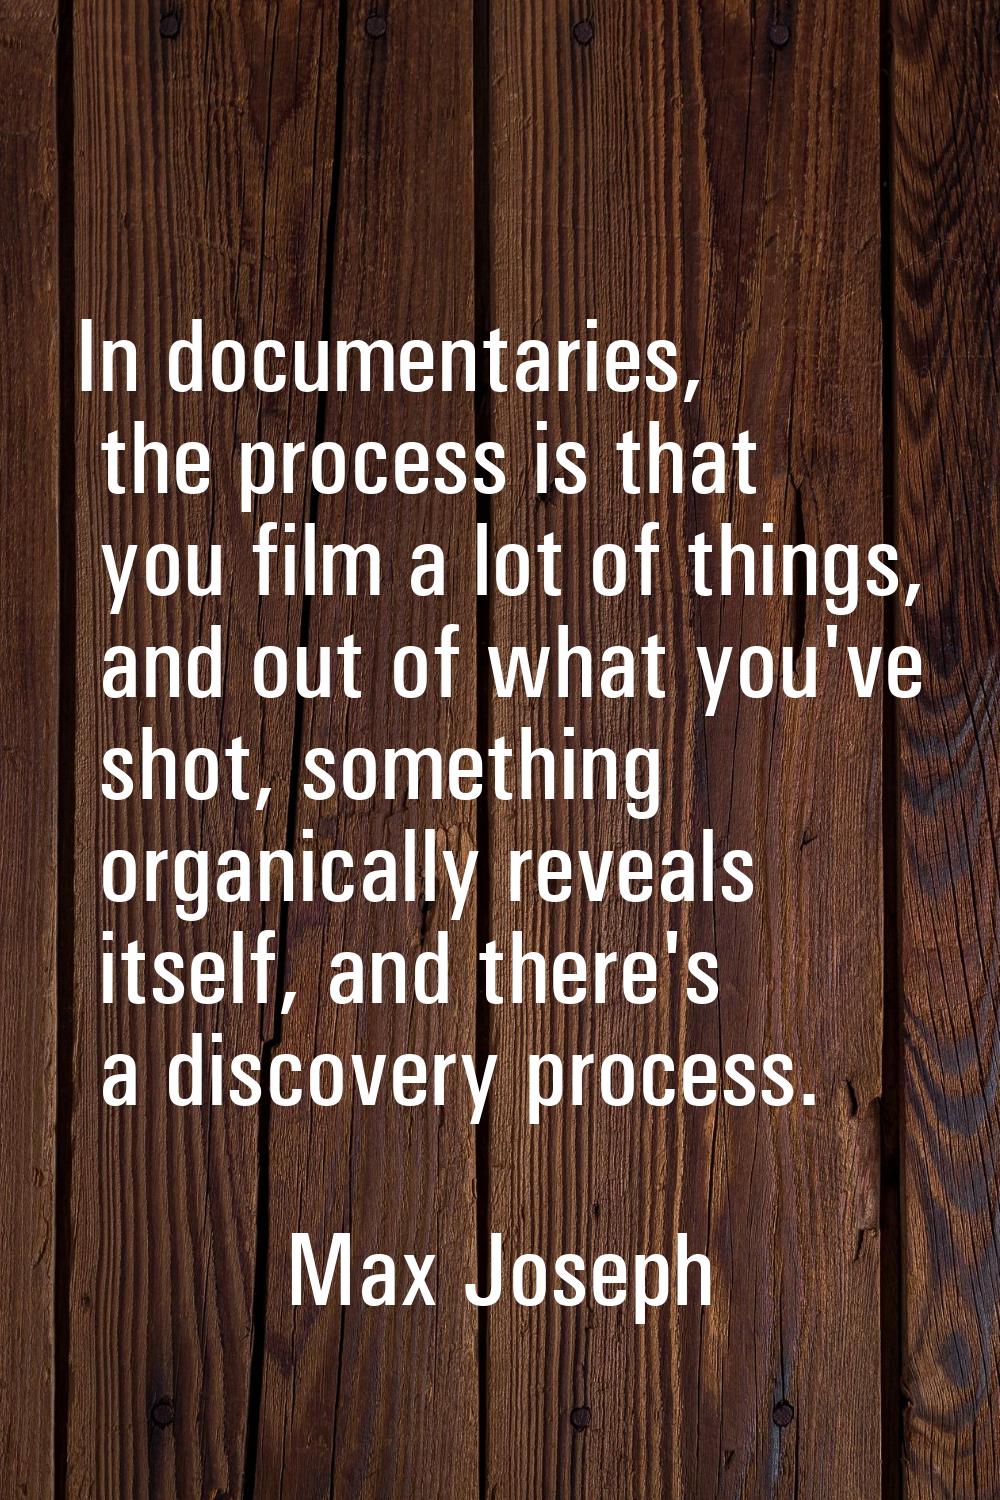 In documentaries, the process is that you film a lot of things, and out of what you've shot, someth